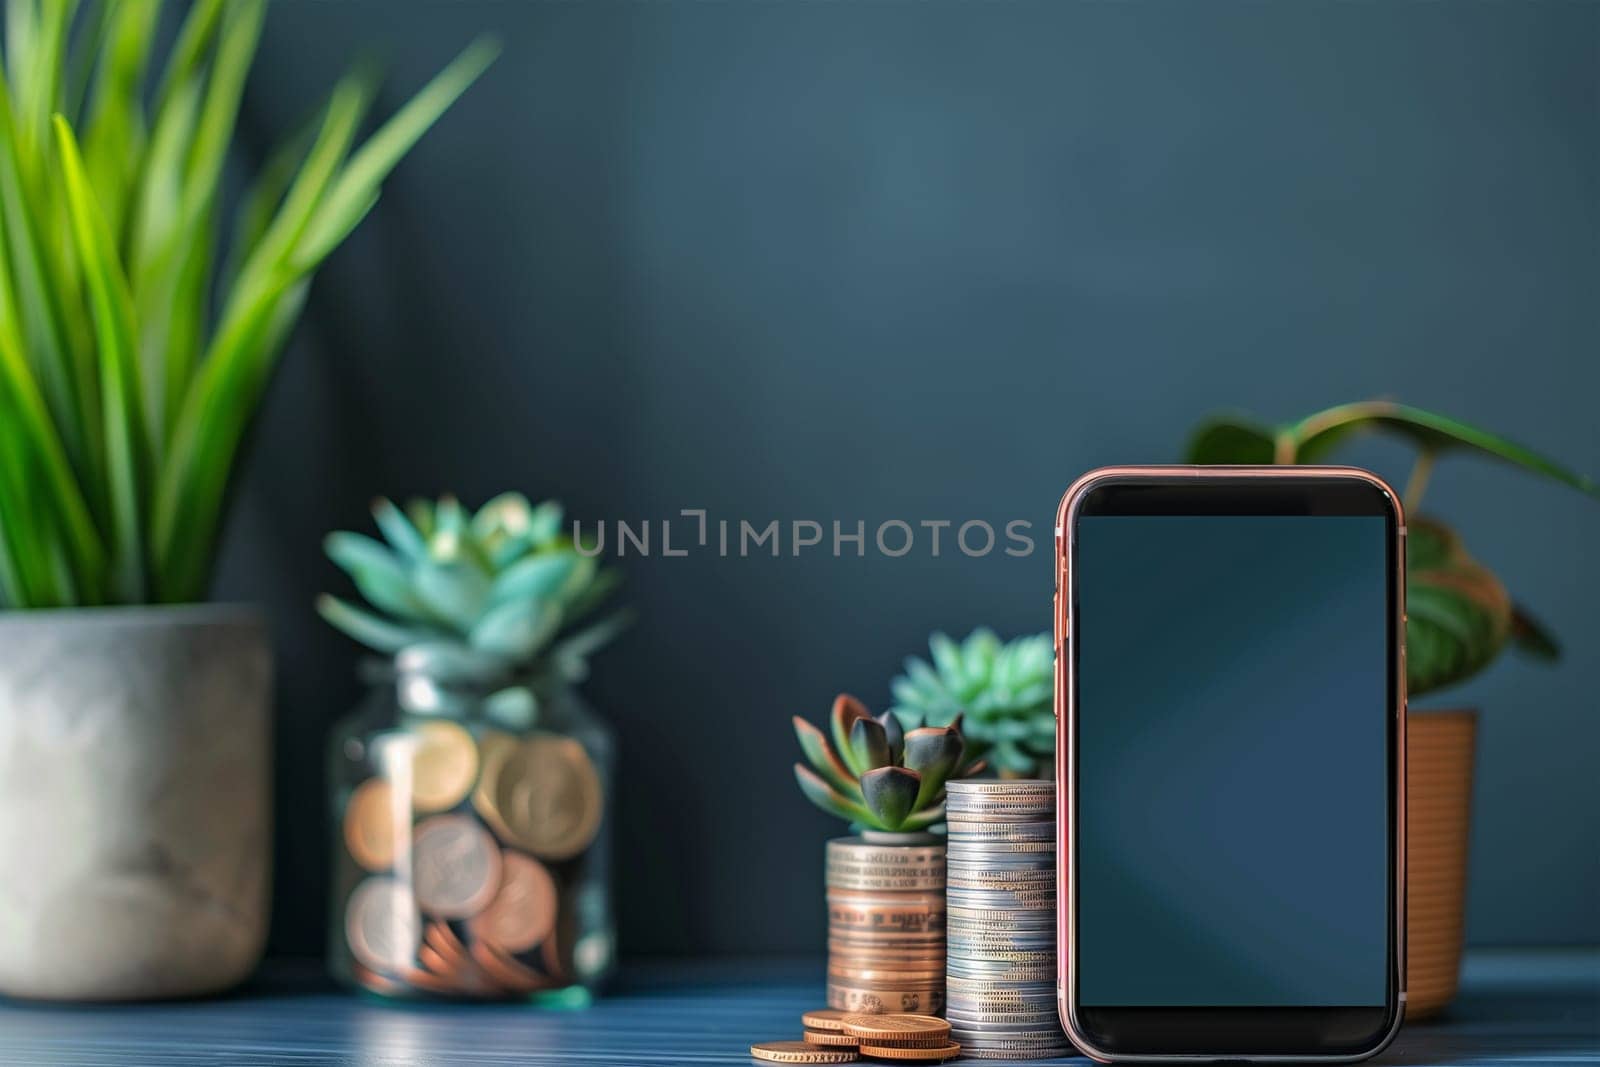 A smartphone, coins, and a plant arranged on a table.